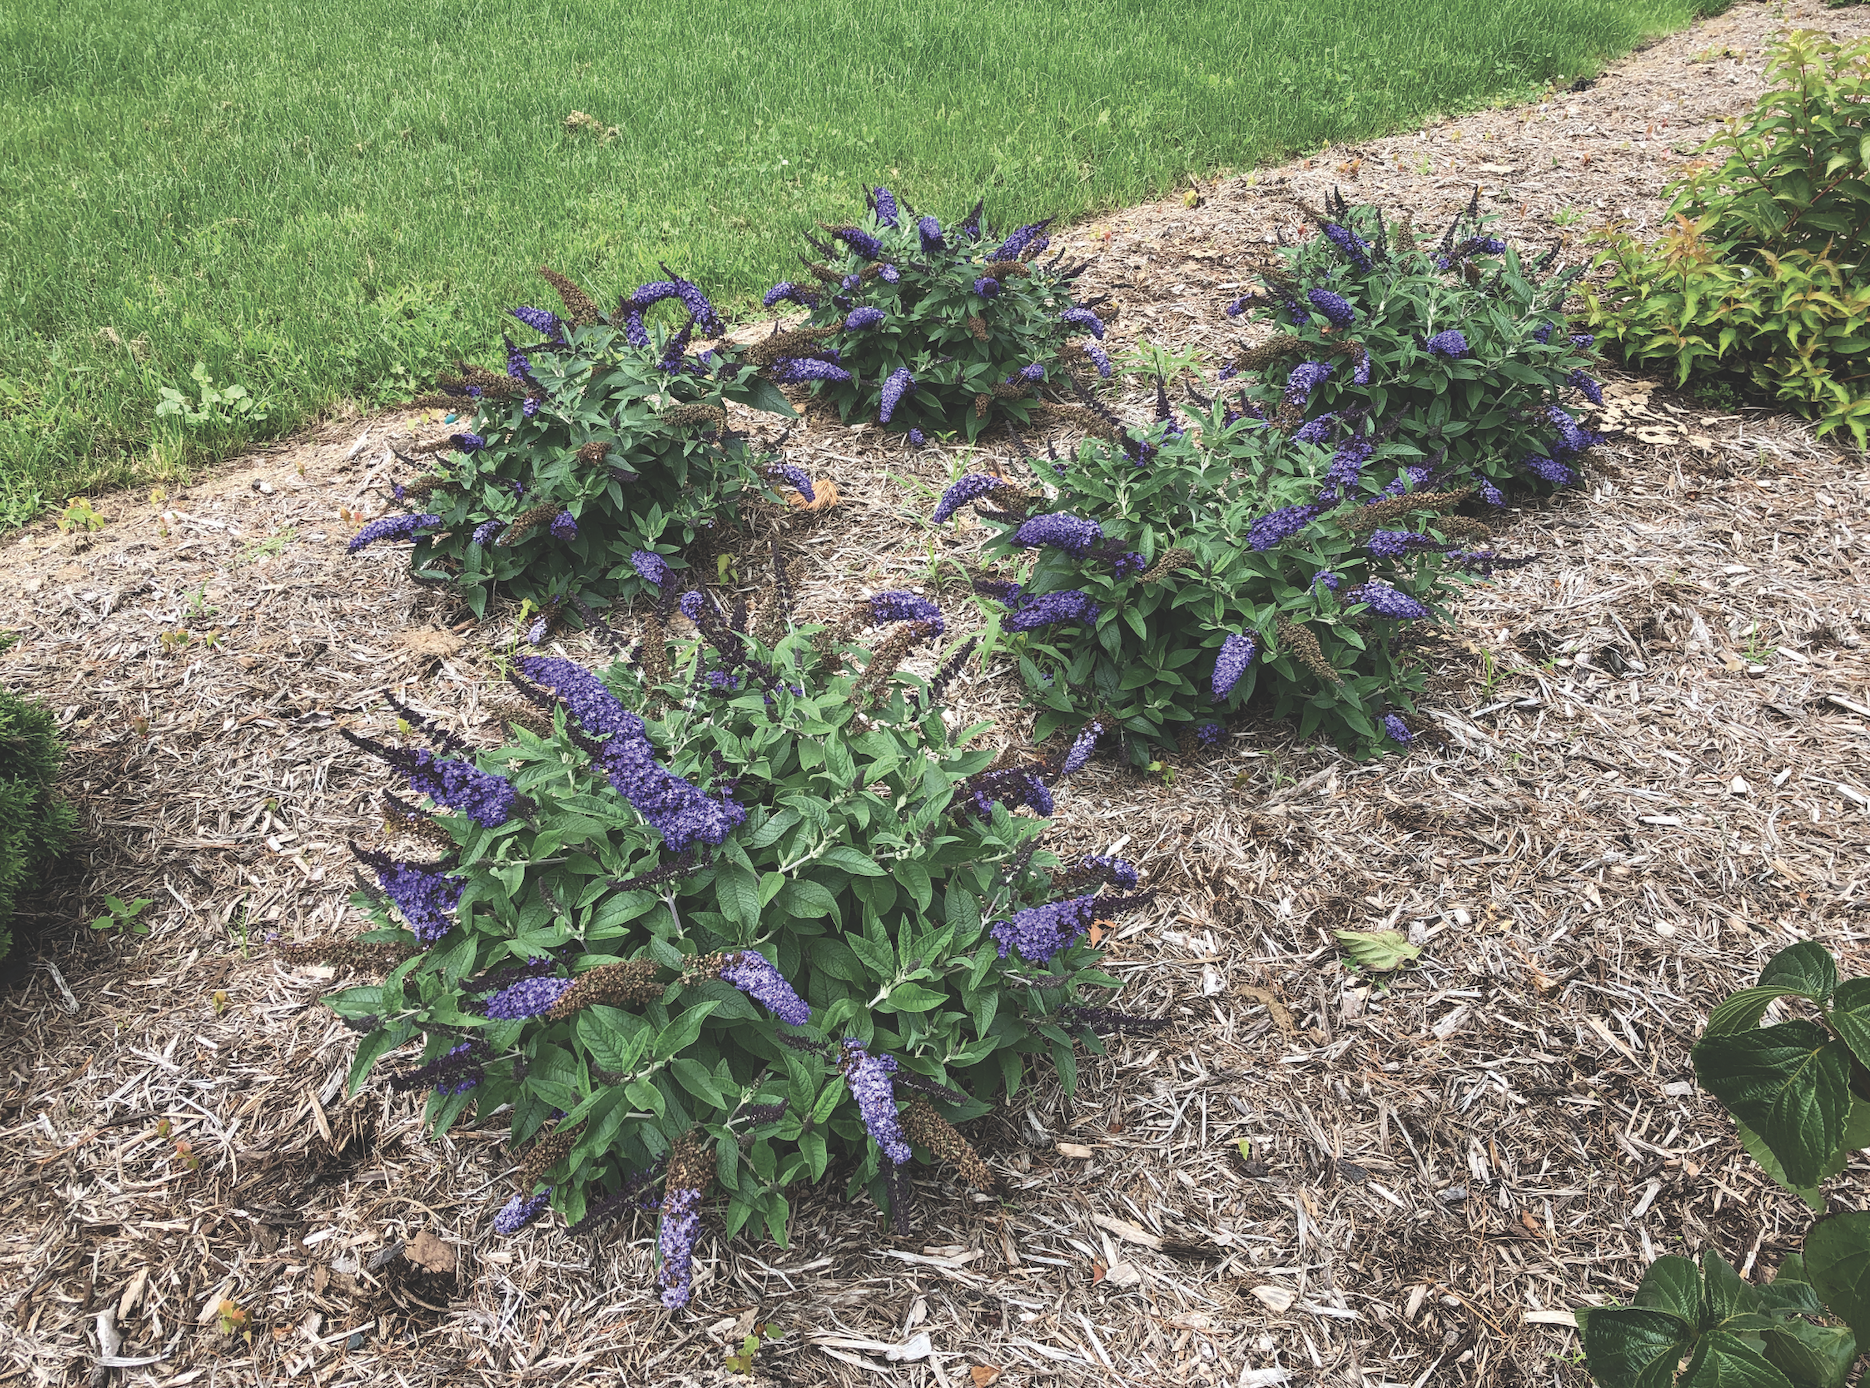 Pugster Blue® Buddleia from Proven Winners